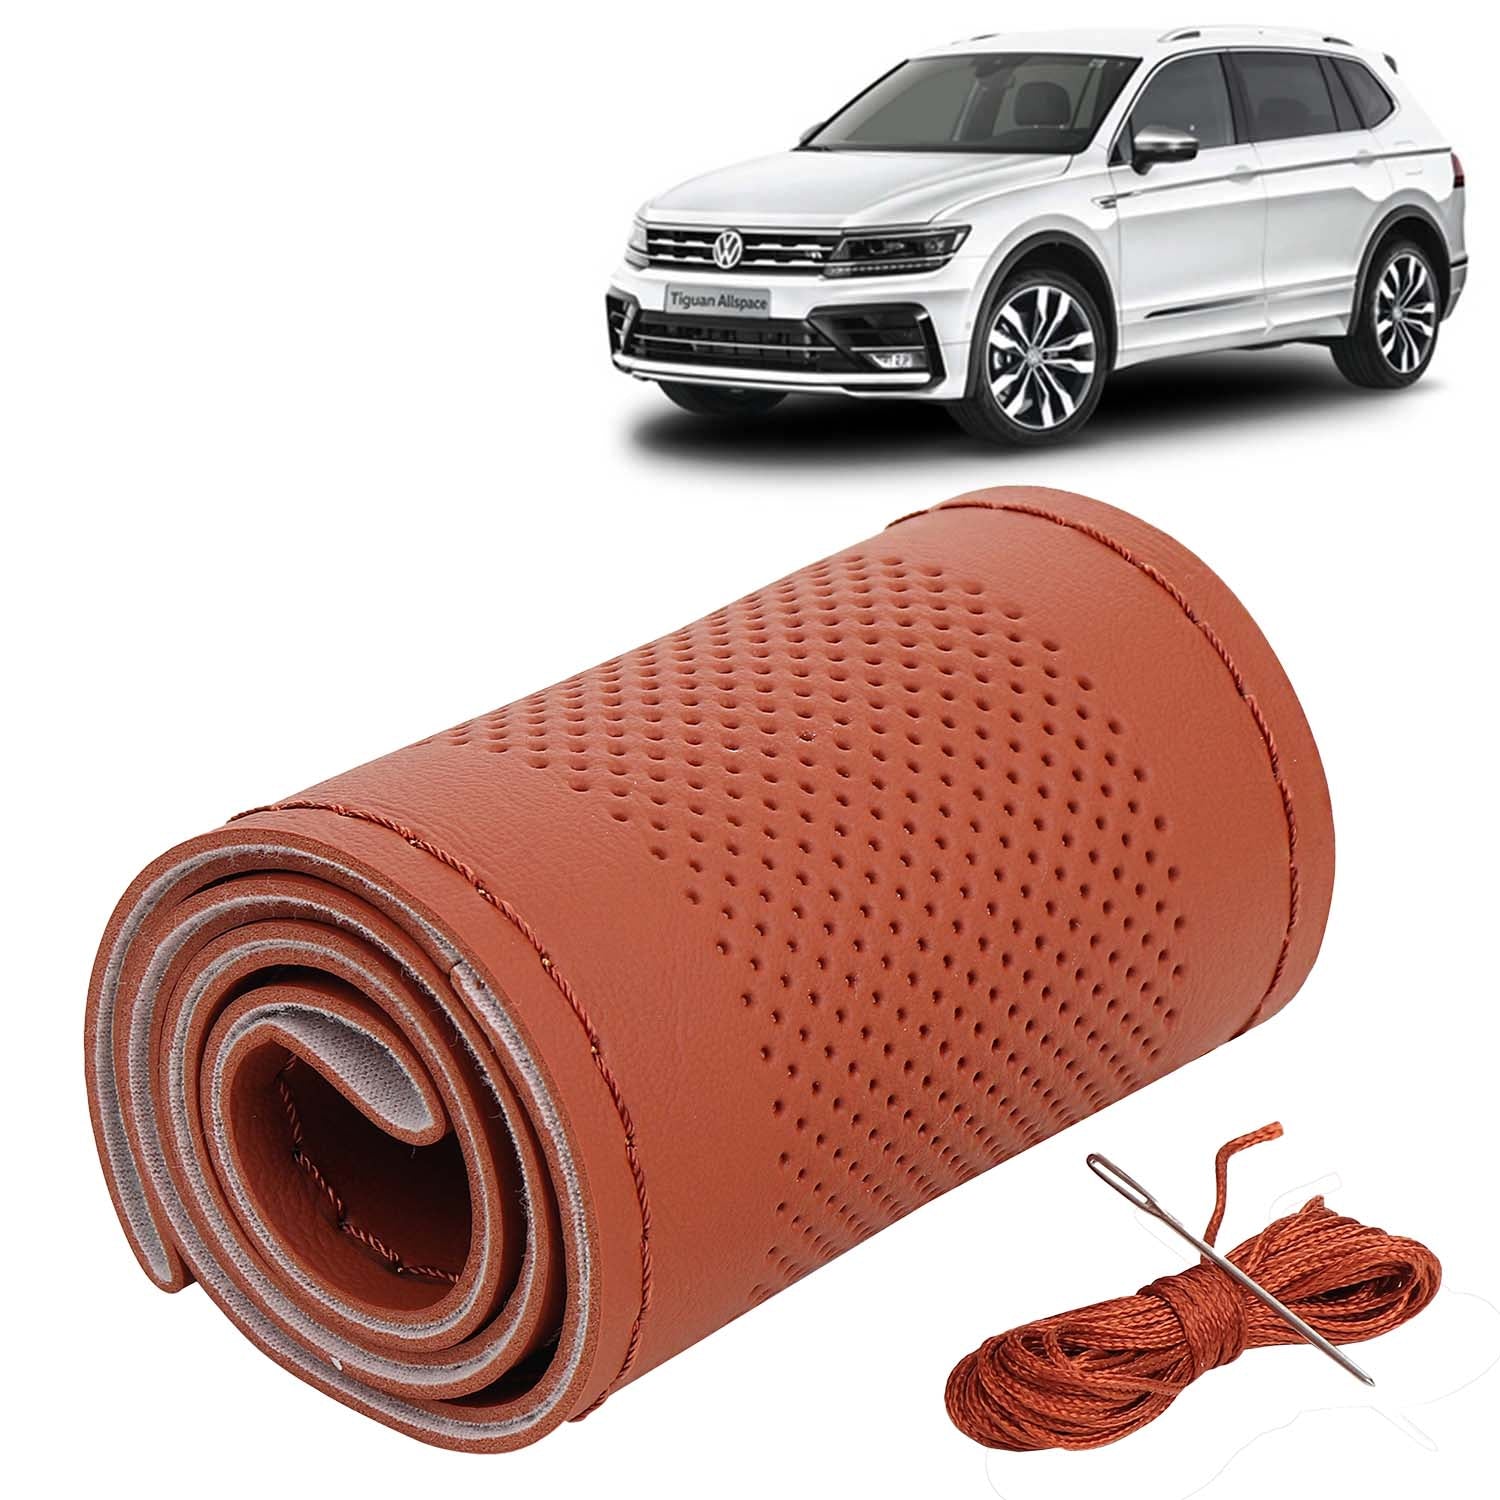 Covers for Volkswagen Tiguan for sale